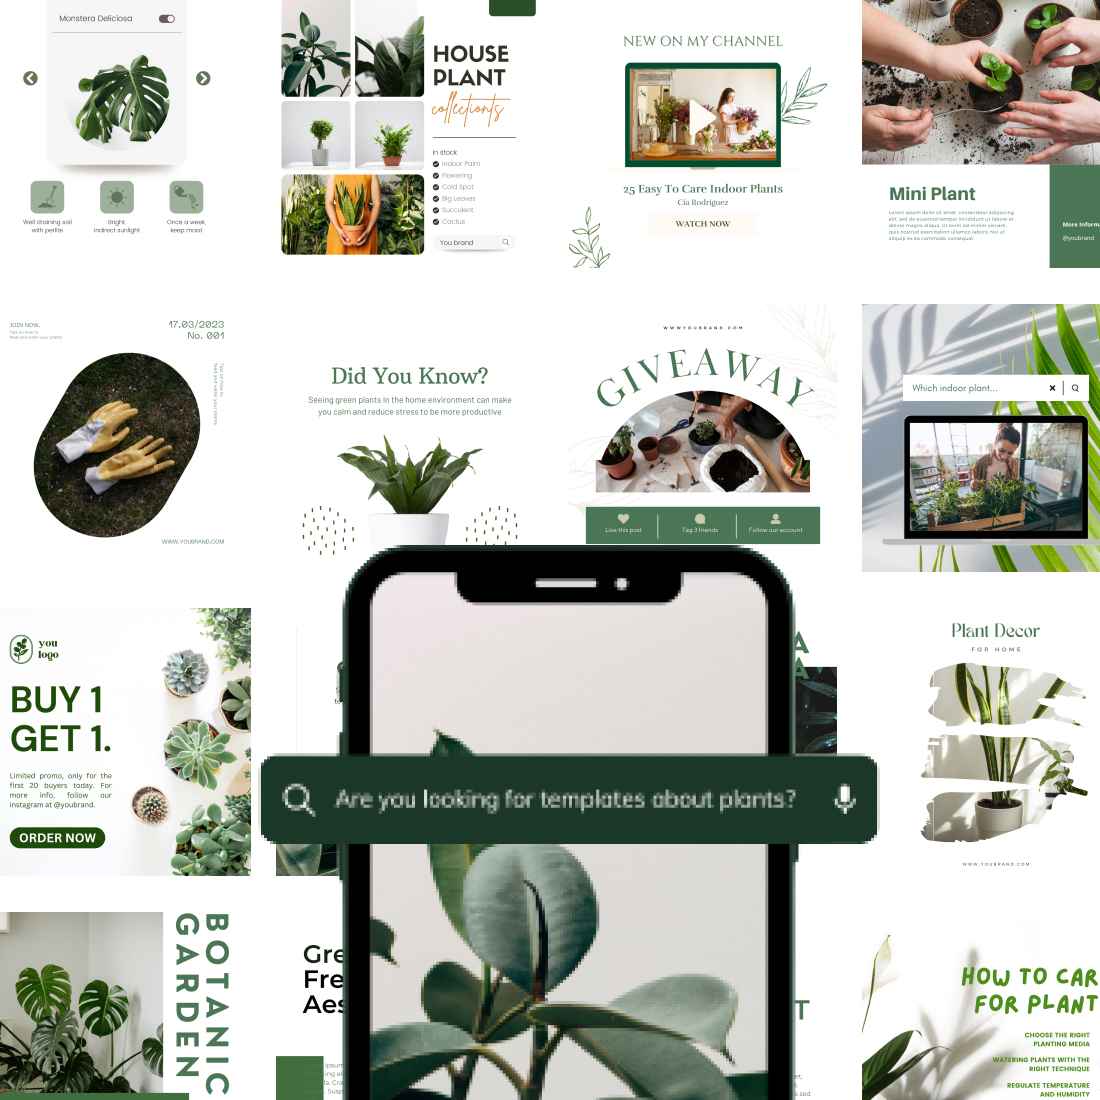 85 PLANT HOUSE TEMPLATE INSTAGRAM ONLY $7 cover image.